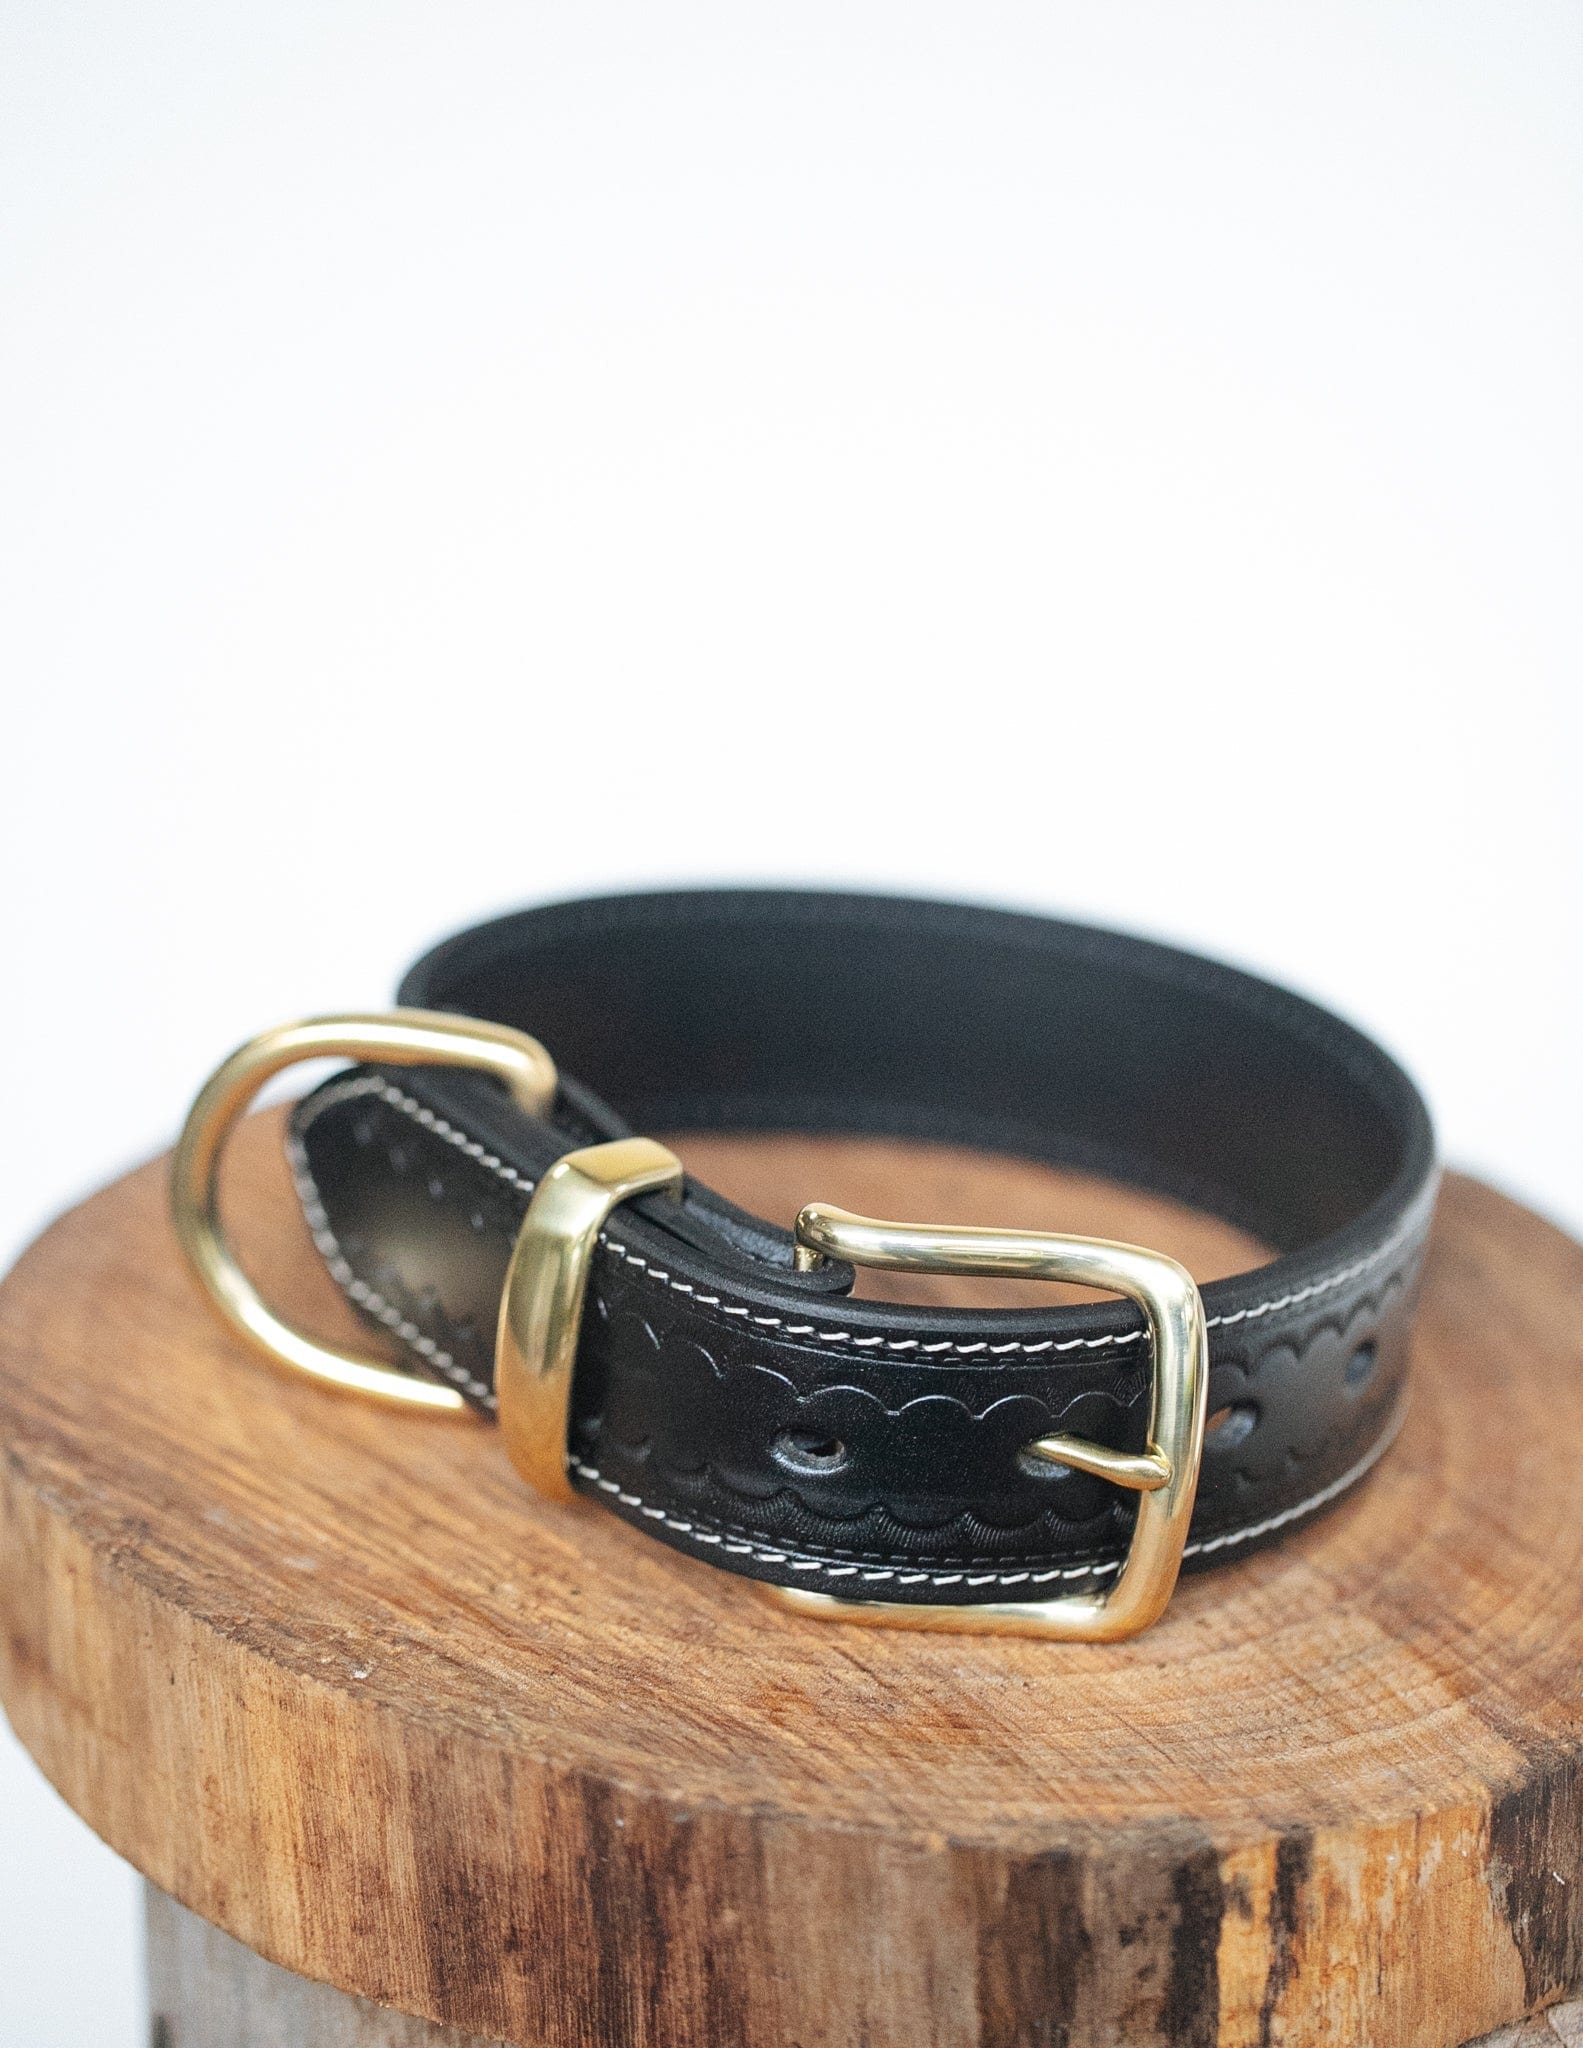 The Real McCaul Leathergoods Pet Collars & Harnesses Deluxe Rancher Dog Collar - 38mm - Black Australian Made Australian Owned Leather Dog Collar with Brass Fittings- Australian Made